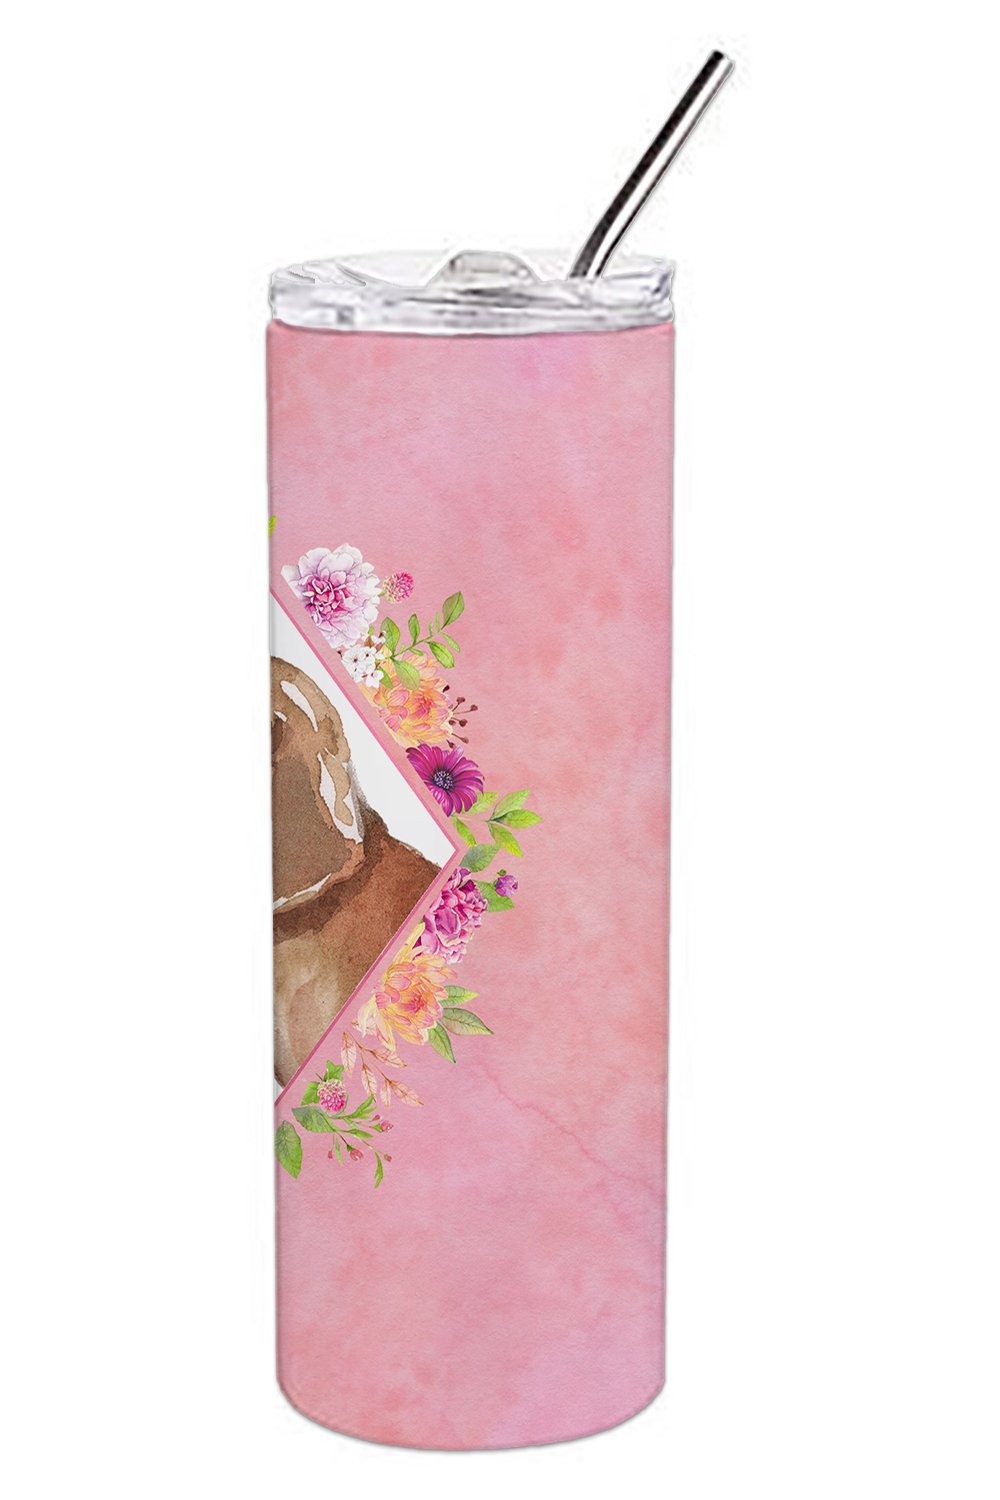 Dachshund Pink Flowers Double Walled Stainless Steel 20 oz Skinny Tumbler CK4207TBL20 by Caroline's Treasures